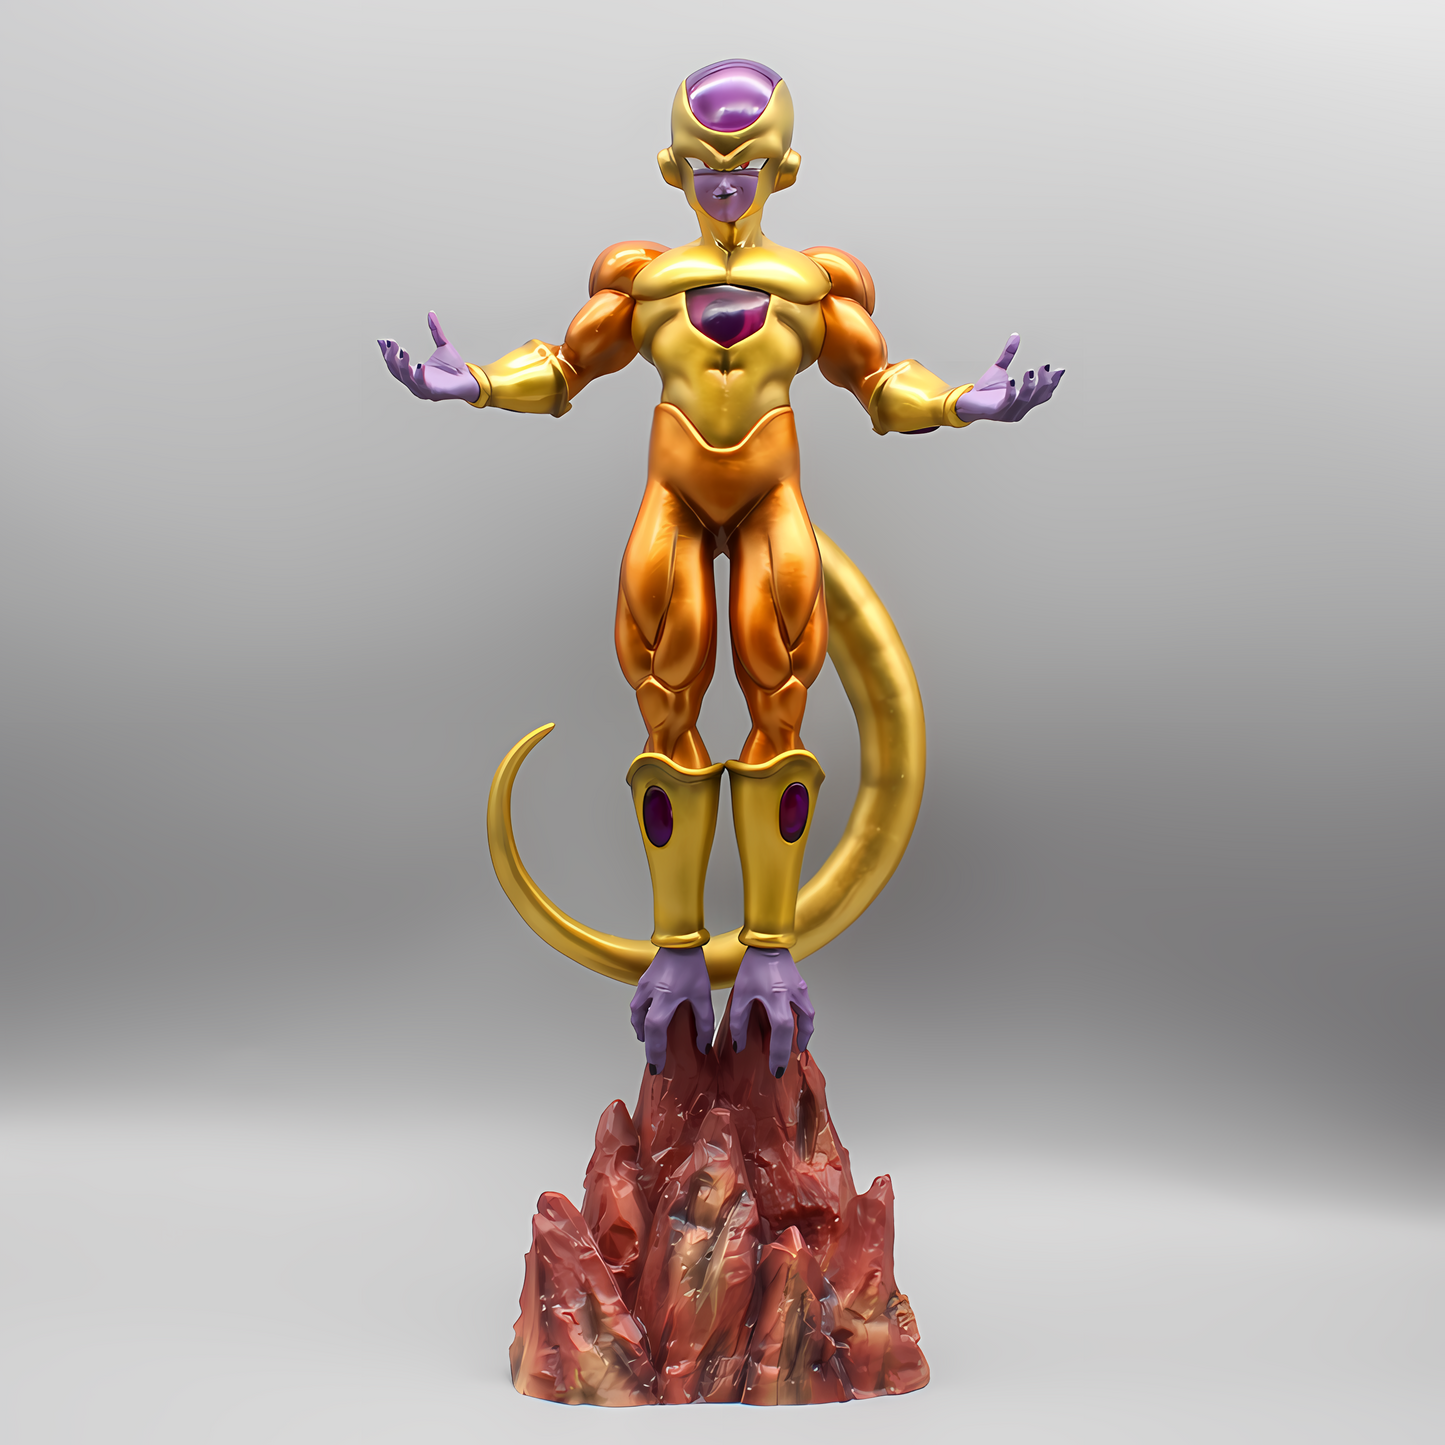 Dragon Ball collectible figure of Golden Frieza in a regal pose with arms open, standing on a molten rock base against a muted grey background.